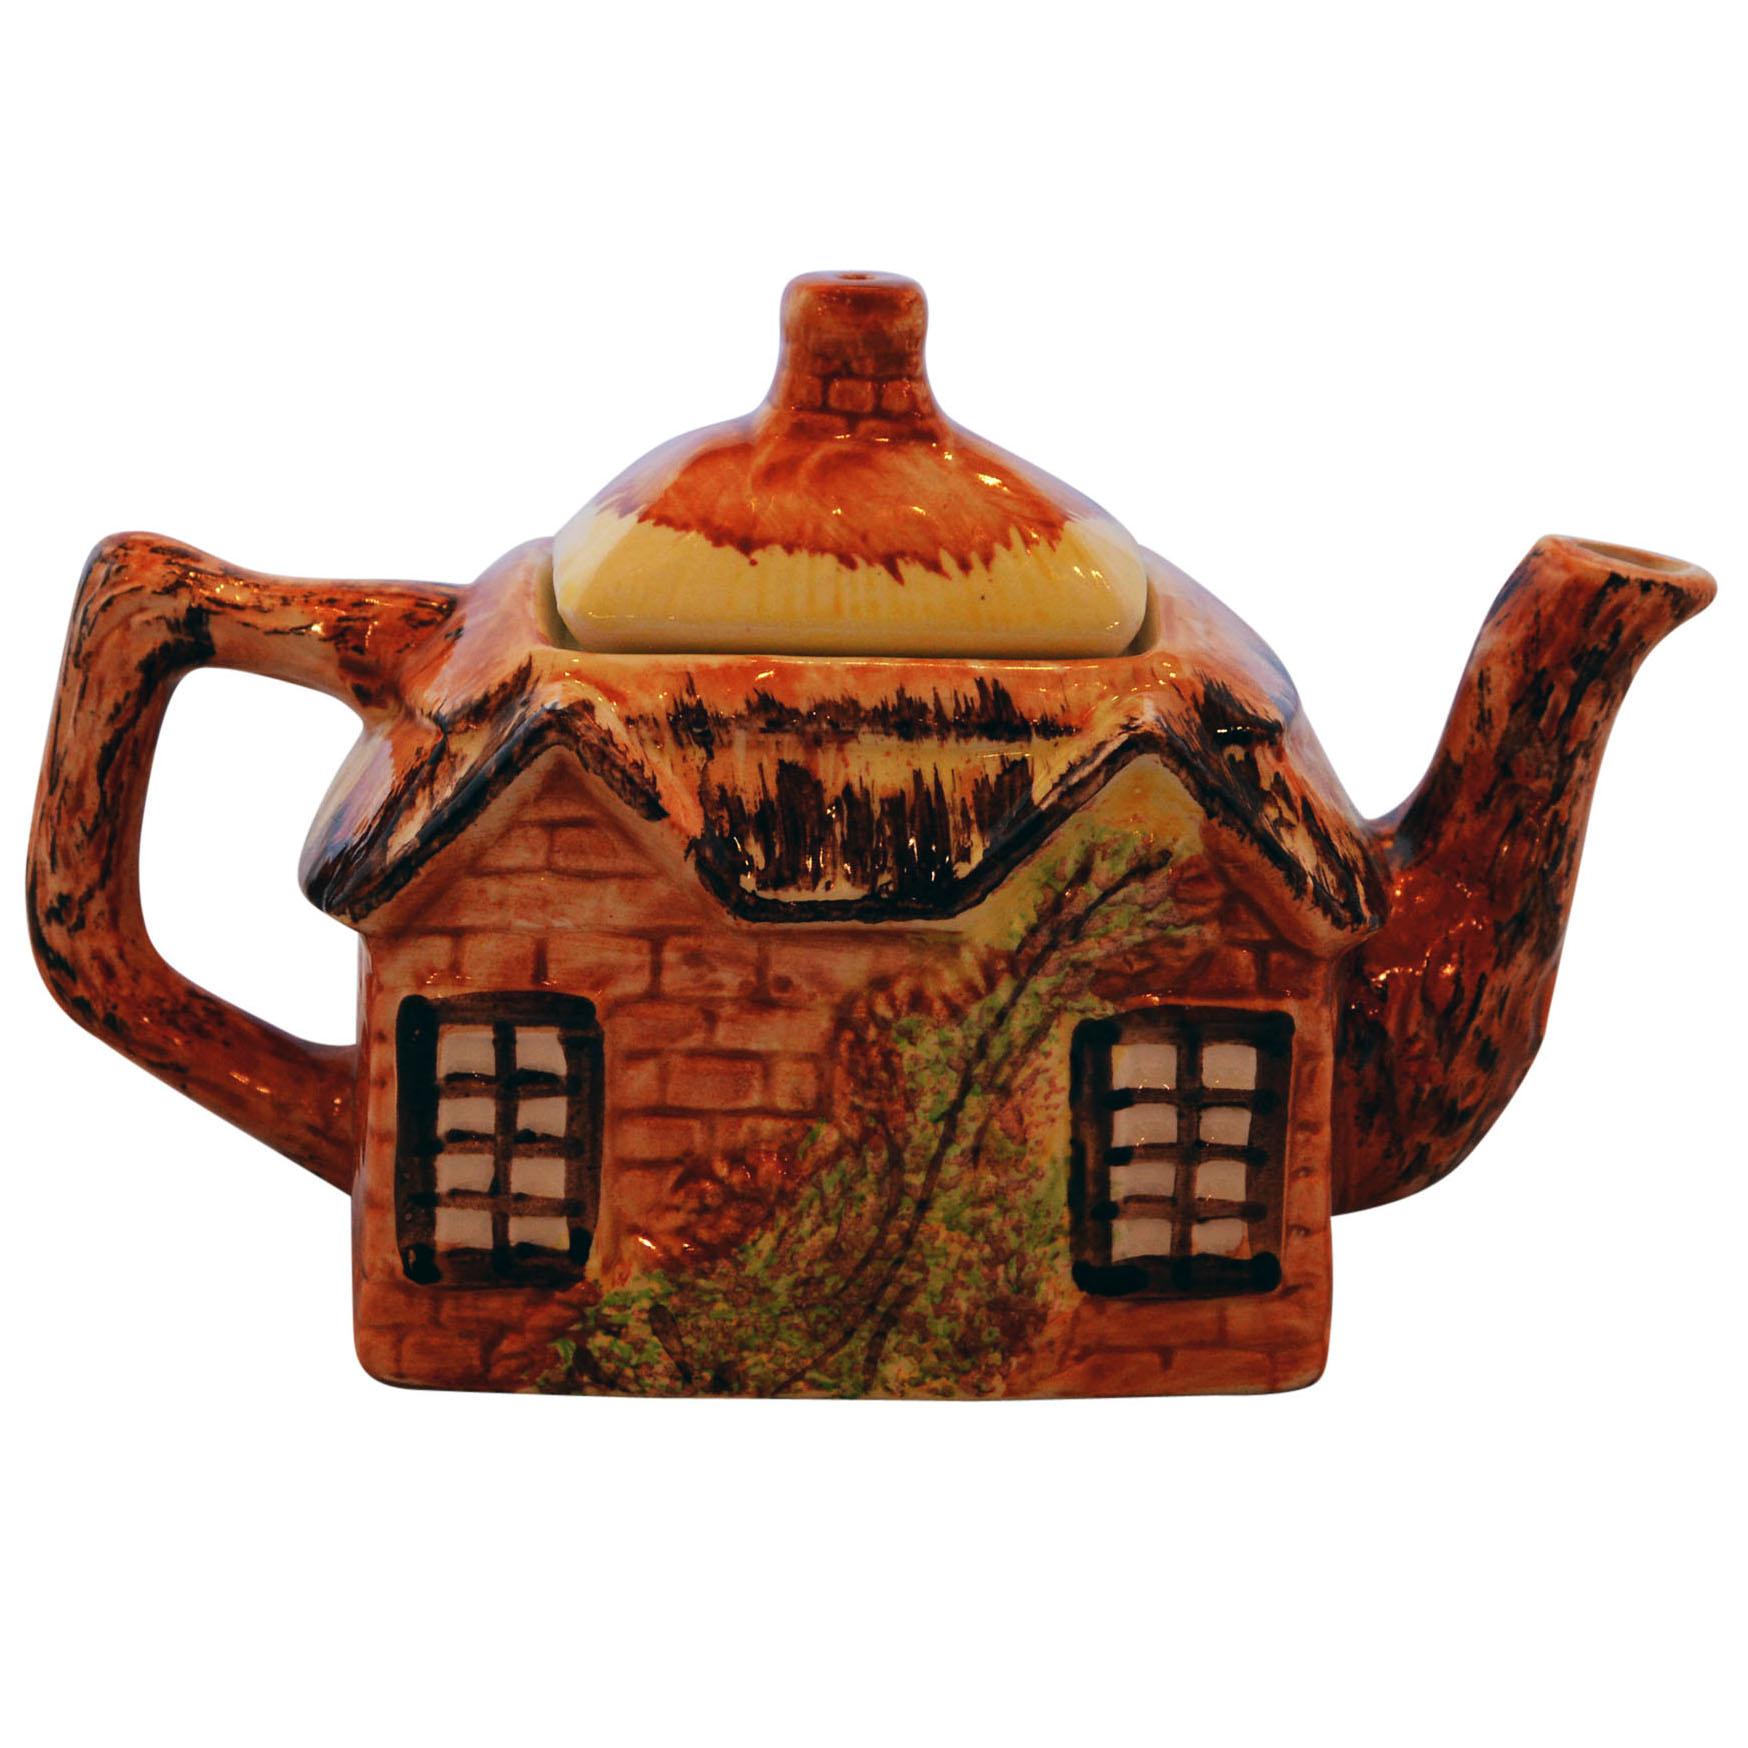 English Cottageware Teapot In Good Condition For Sale In Pataskala, OH